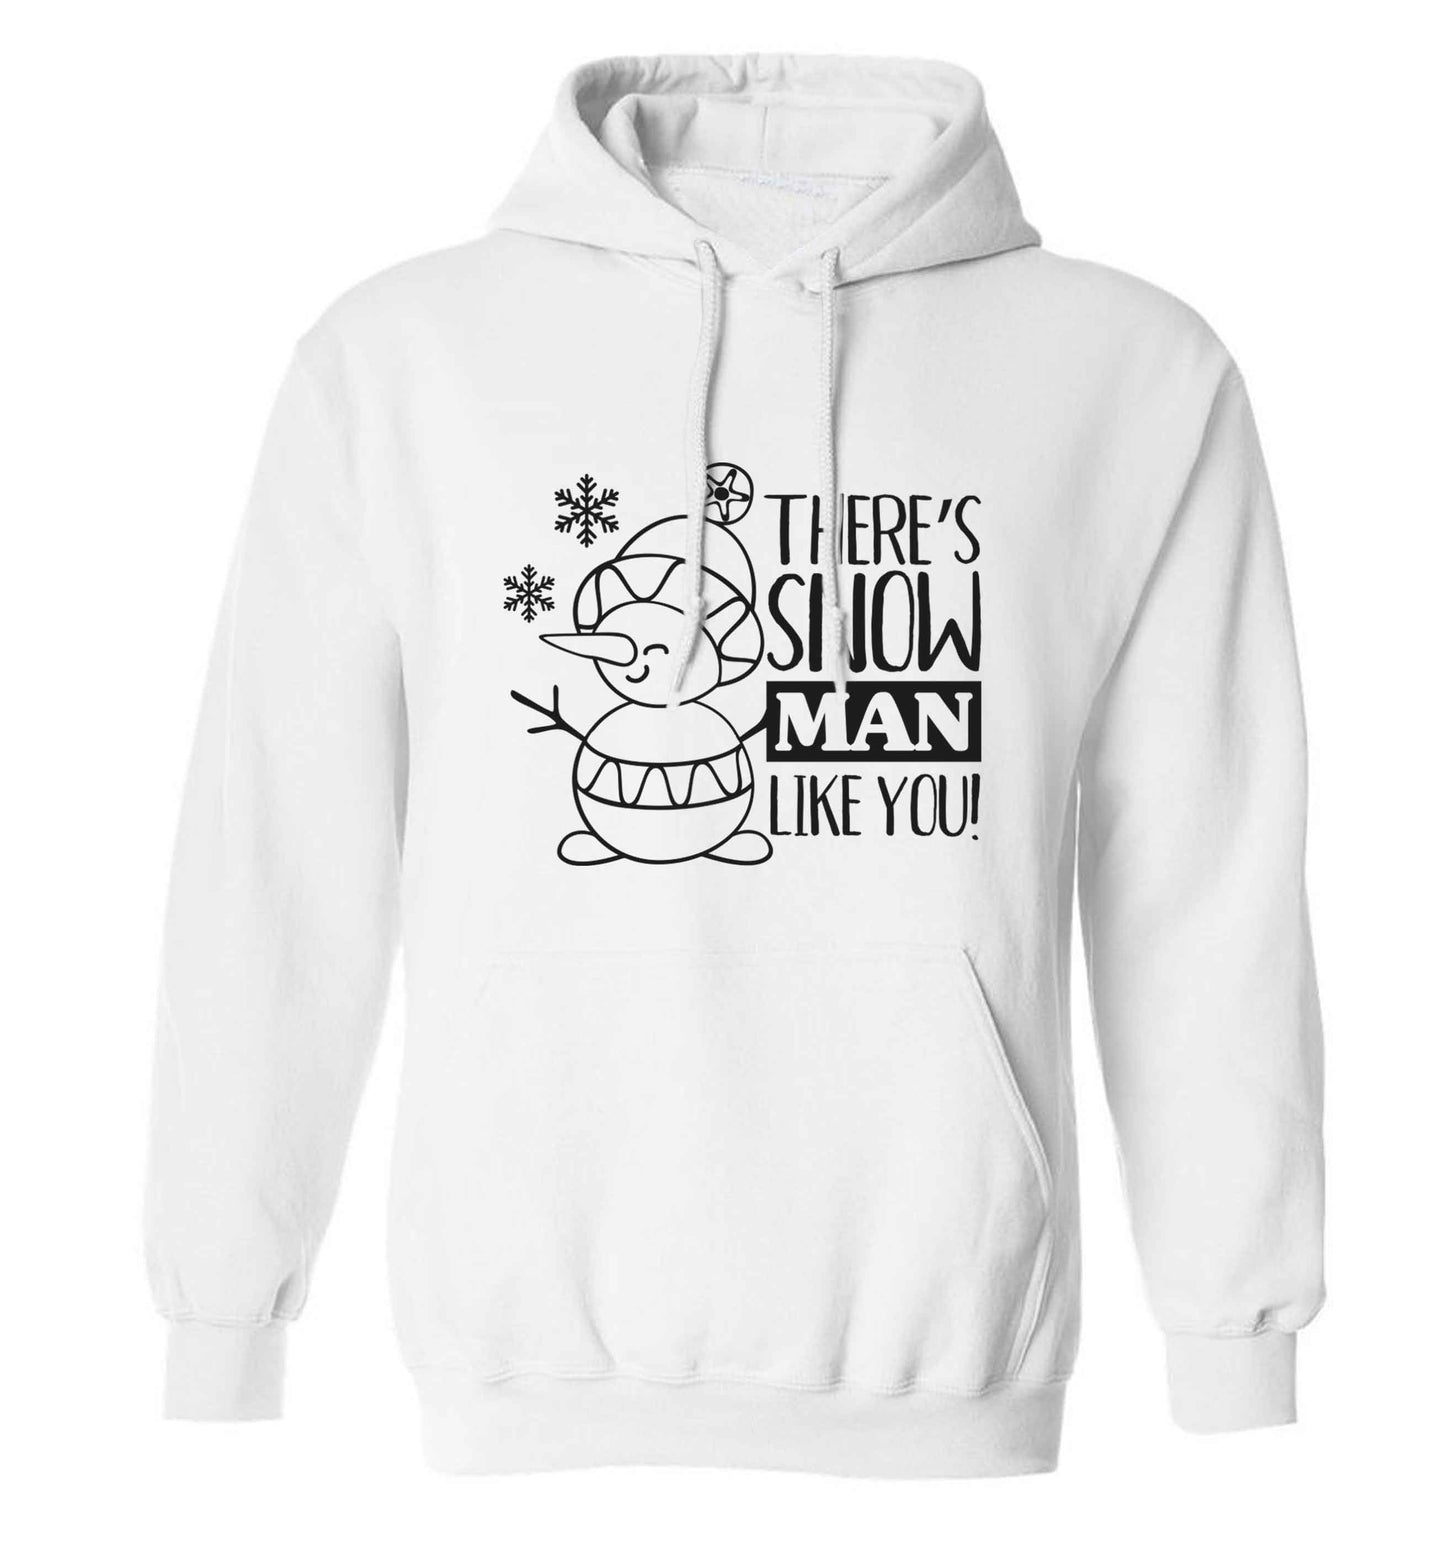 There's snow man like you adults unisex white hoodie 2XL